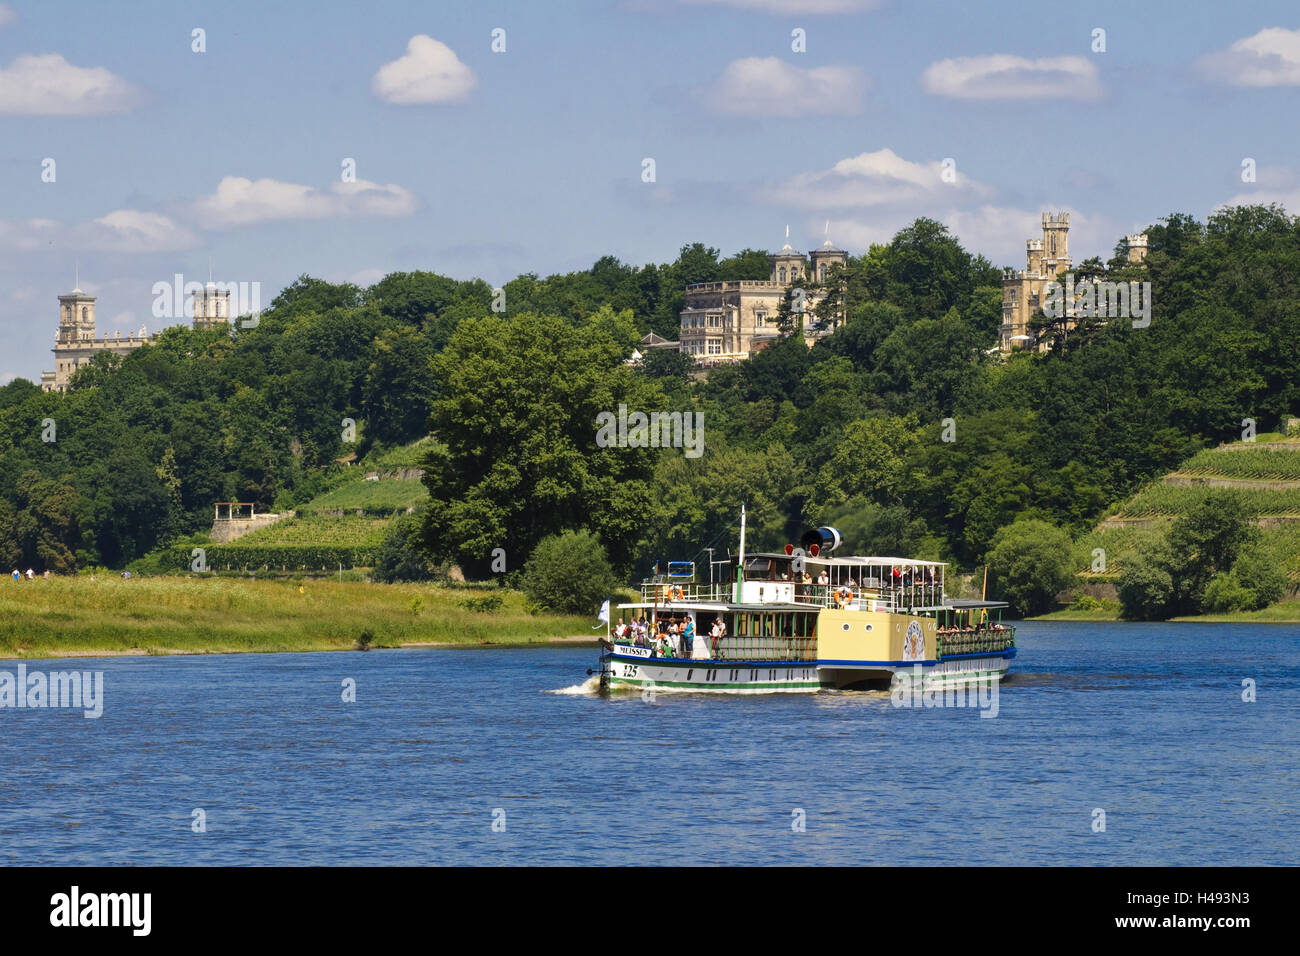 The Elbe and Elbe castles, steamboat, Dresden, Saxony, Germany, Stock Photo